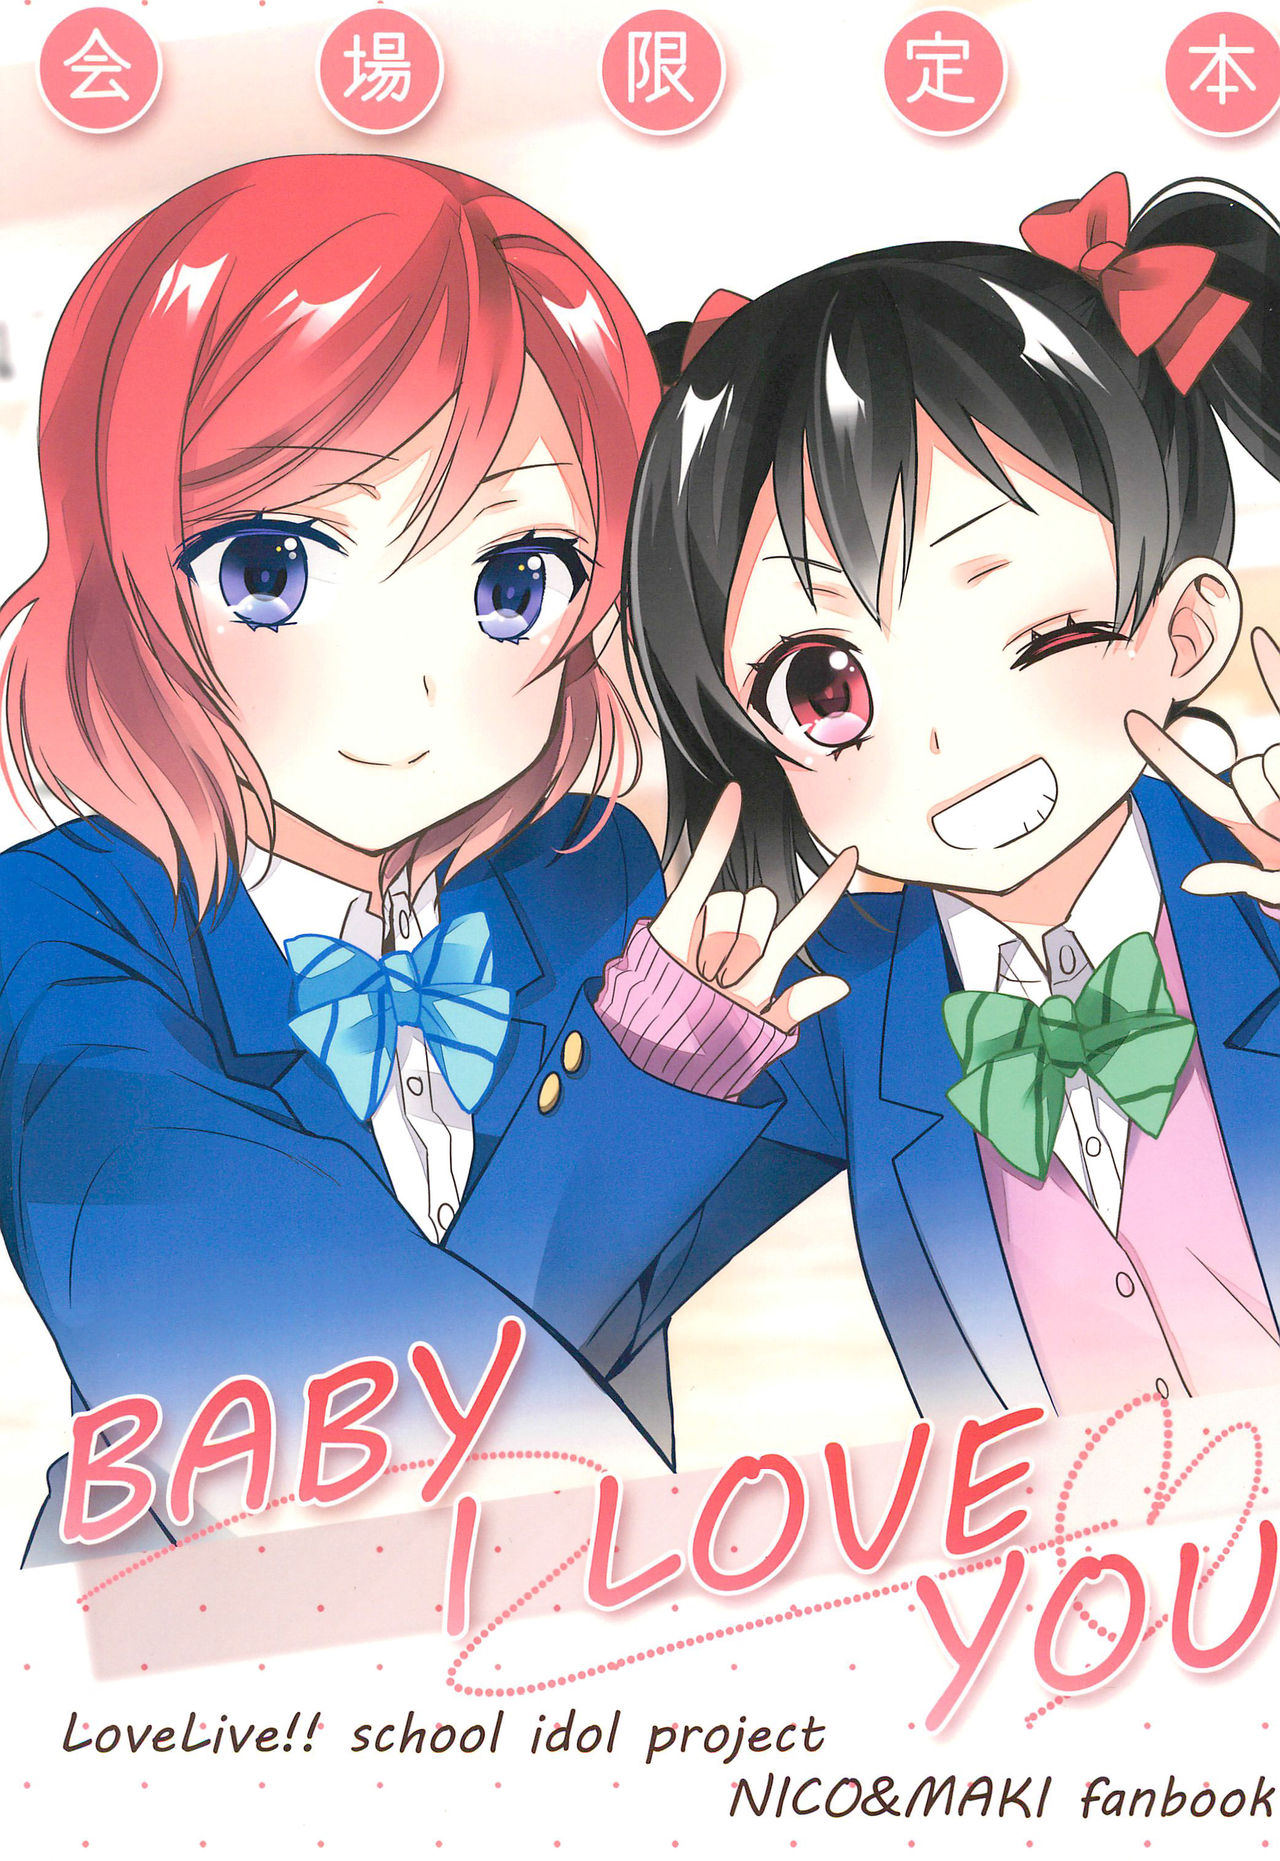 (C91) [Sweet Pea (Ooshima Tomo)] BABY I LOVE YOU (Love Live!) [Chinese] [北京神马个人汉化] page 2 full